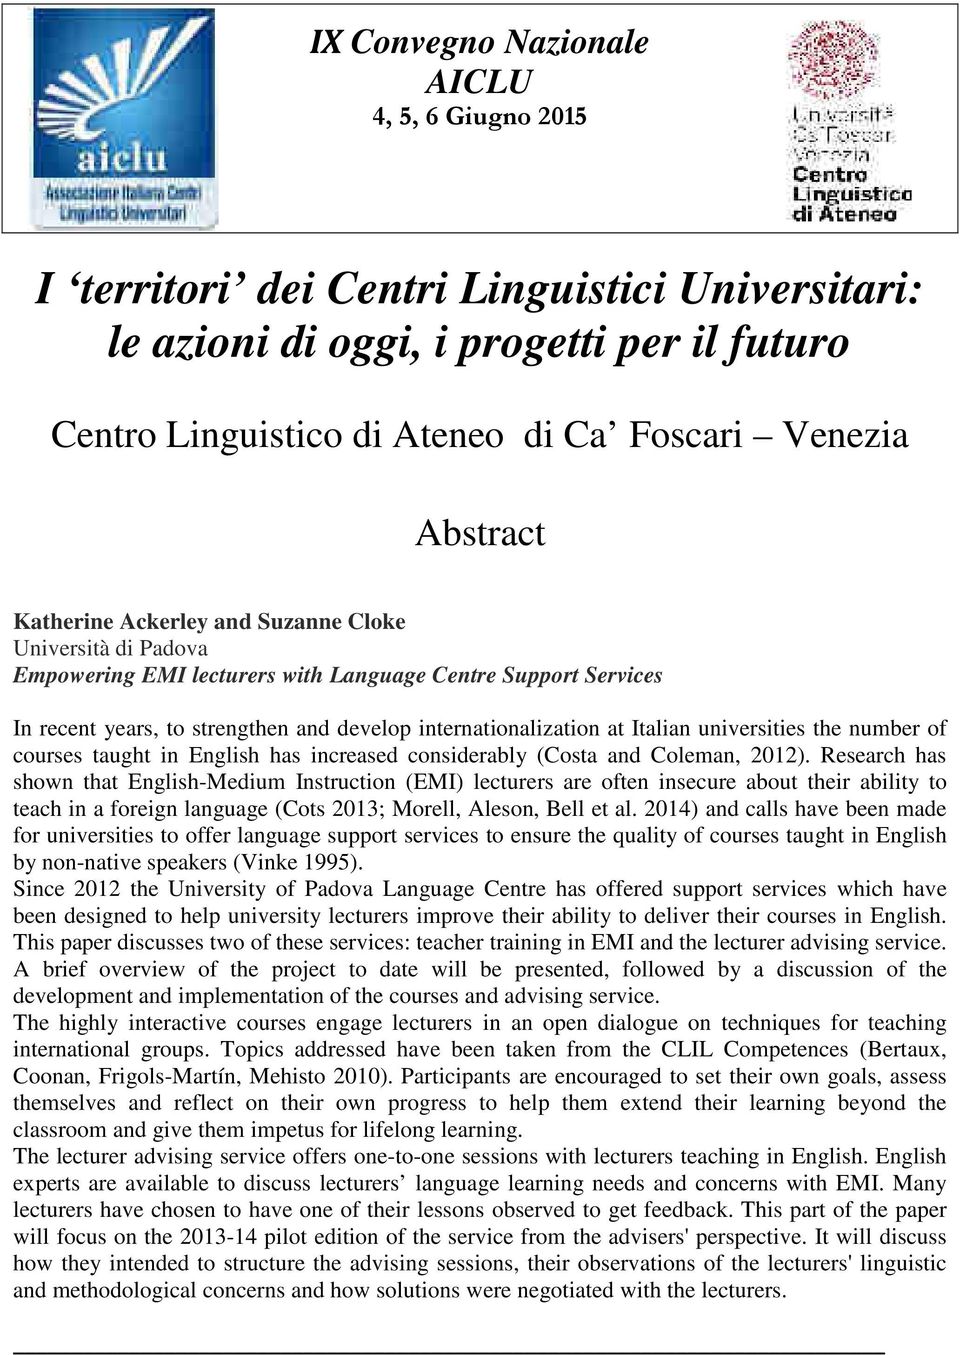 Italian universities the number of courses taught in English has increased considerably (Costa and Coleman, 2012).